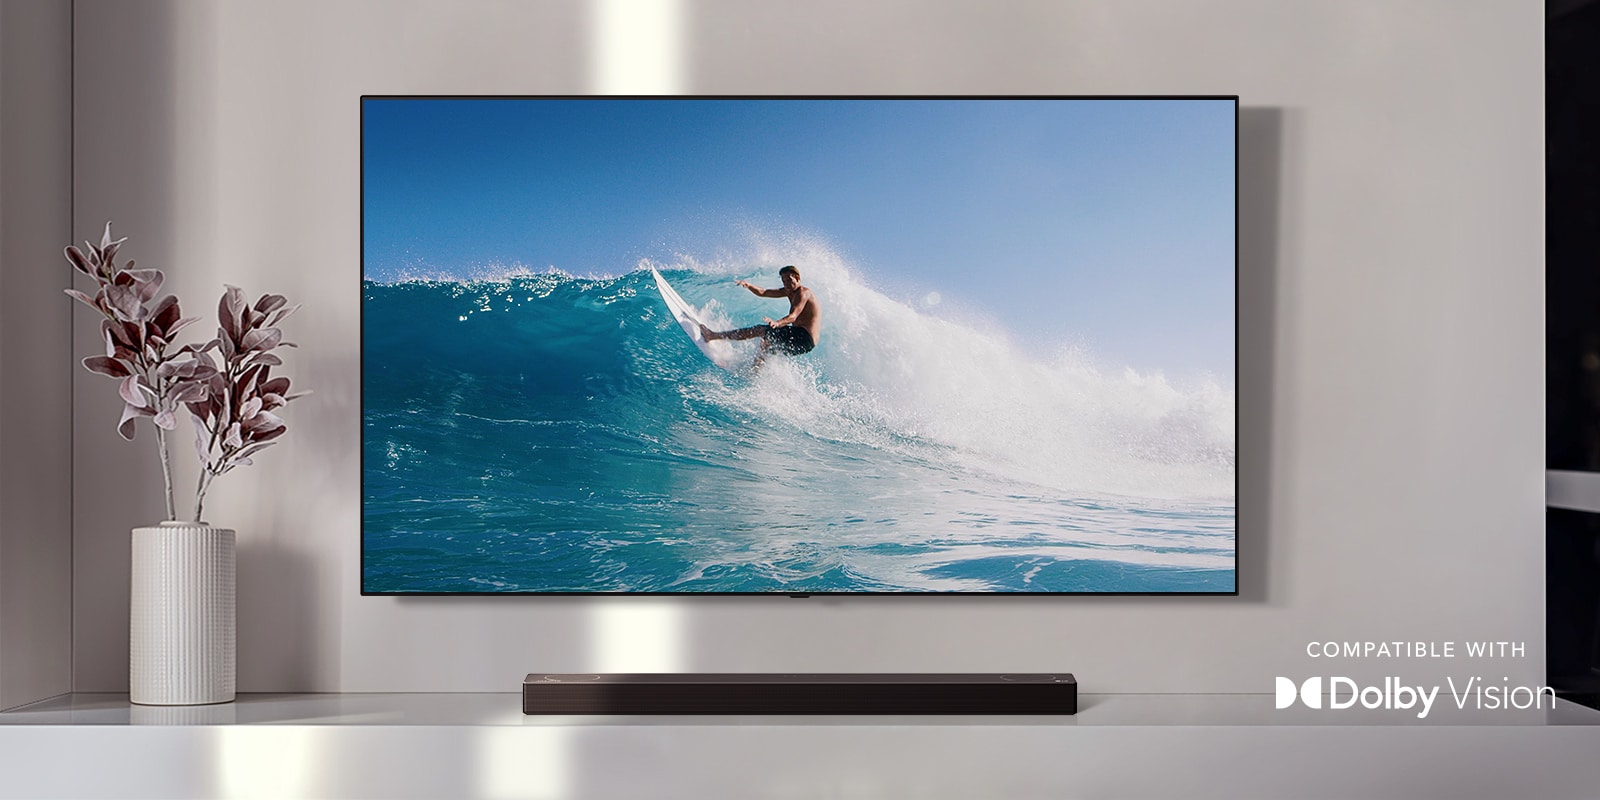 TV is on the wall. TV shows a man surfing on big wave. LG Soundbar is right below TV on a white shelf. There is a vase with a flower right next to the soundbar. (play the video)